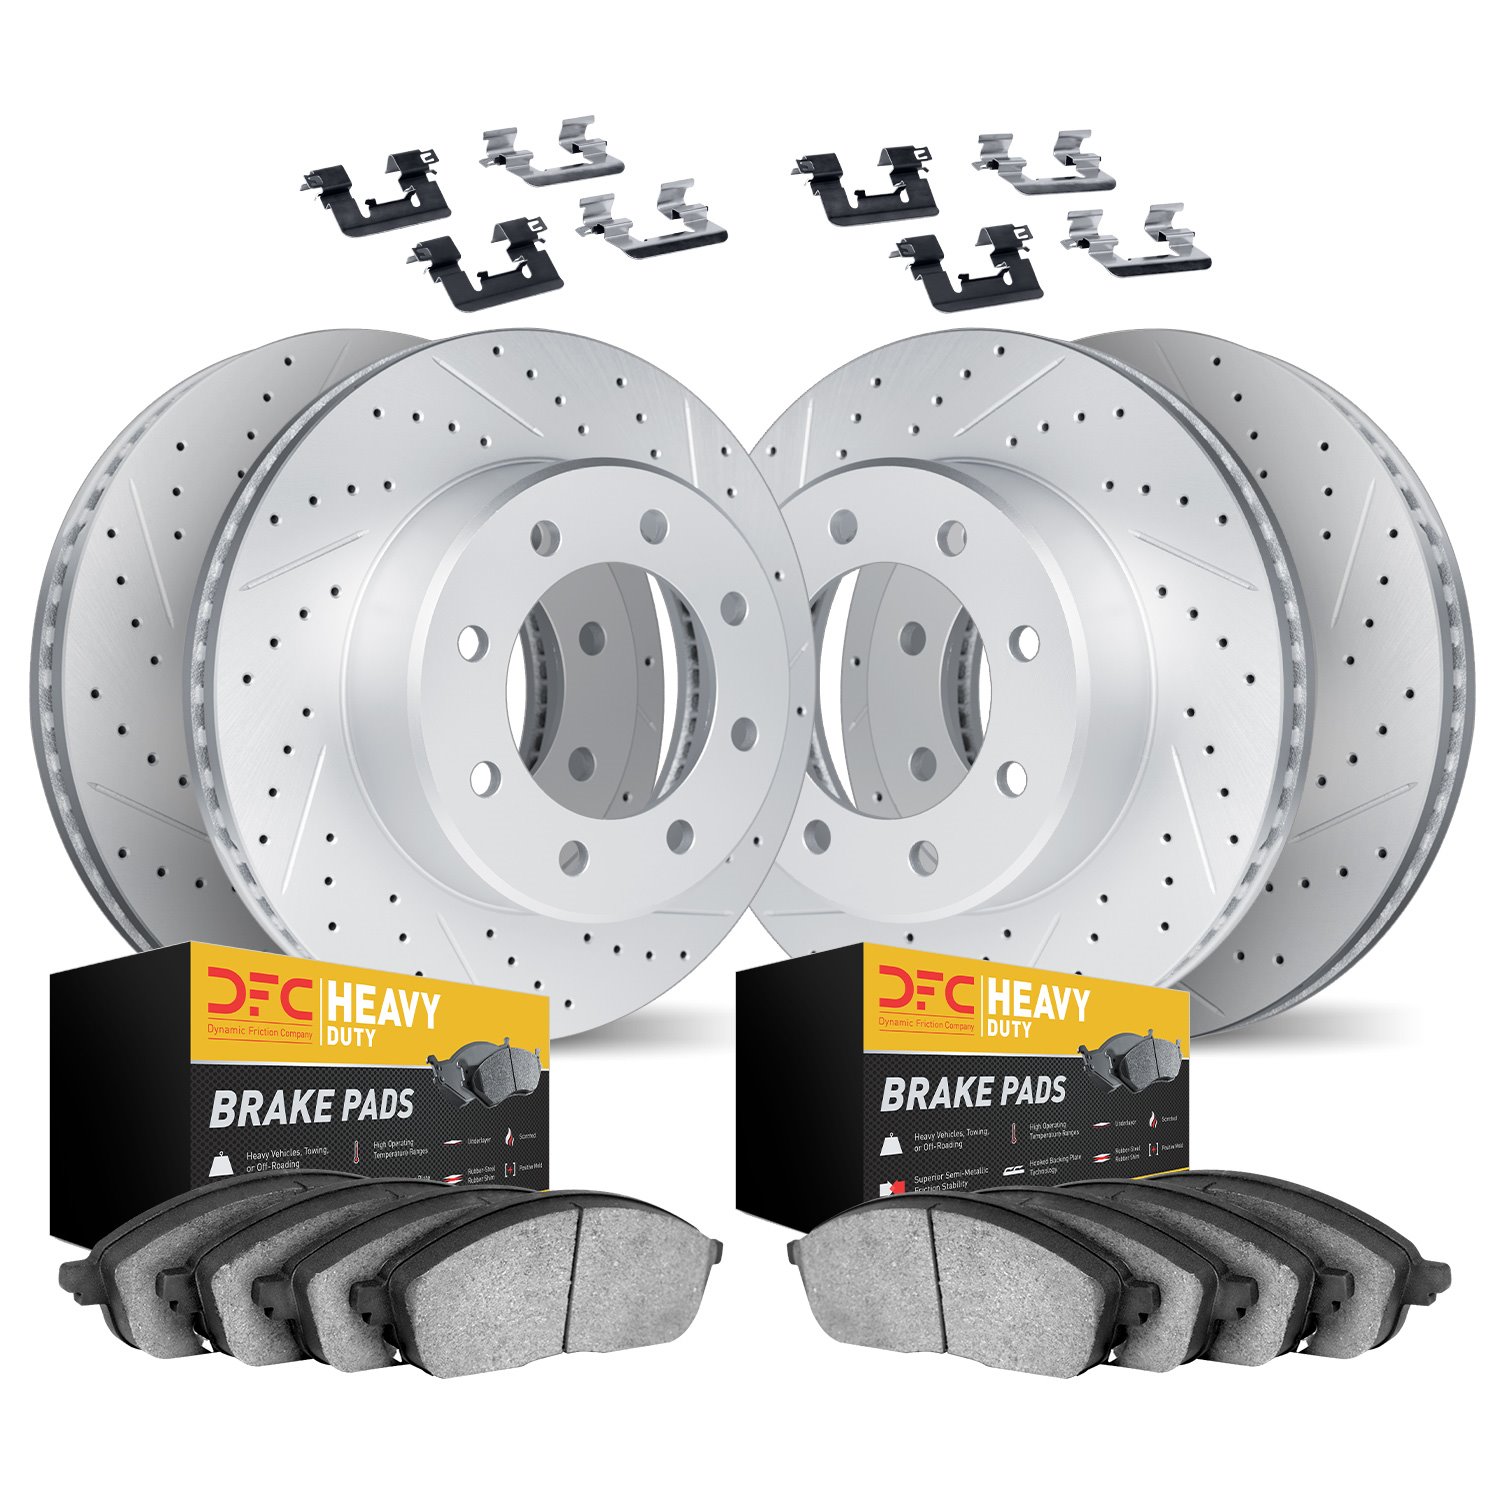 2214-99046 Geoperformance Drilled/Slotted Rotors w/Heavy-Duty Pads Kit & Hardware, 1999-1999 Ford/Lincoln/Mercury/Mazda, Positio